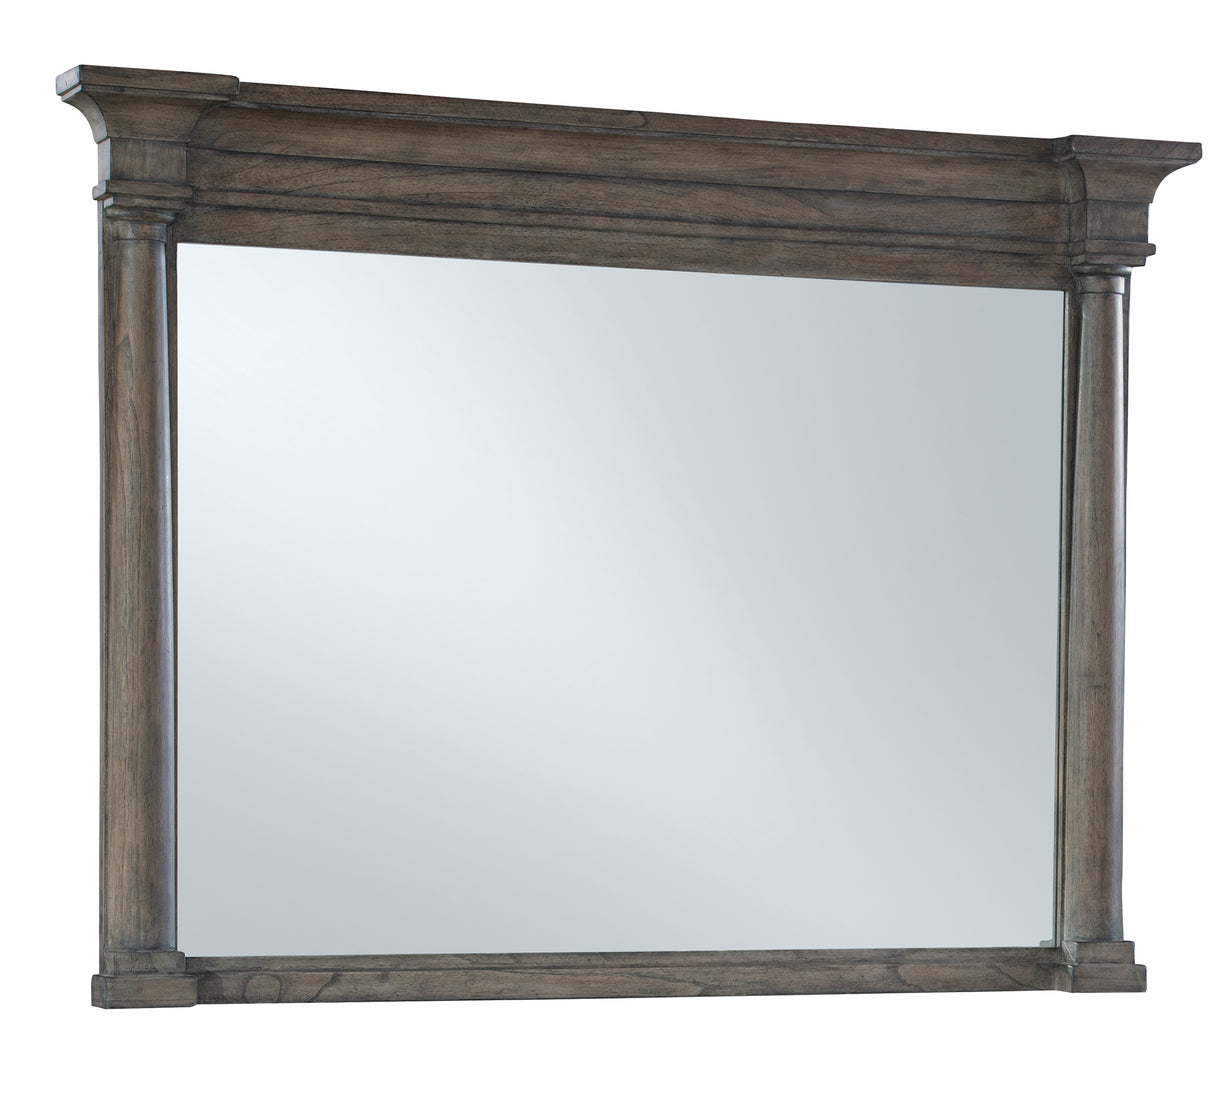 Hekman 23569 Lincoln Park 48.5in. x 4in. x 37.25in. Mirror